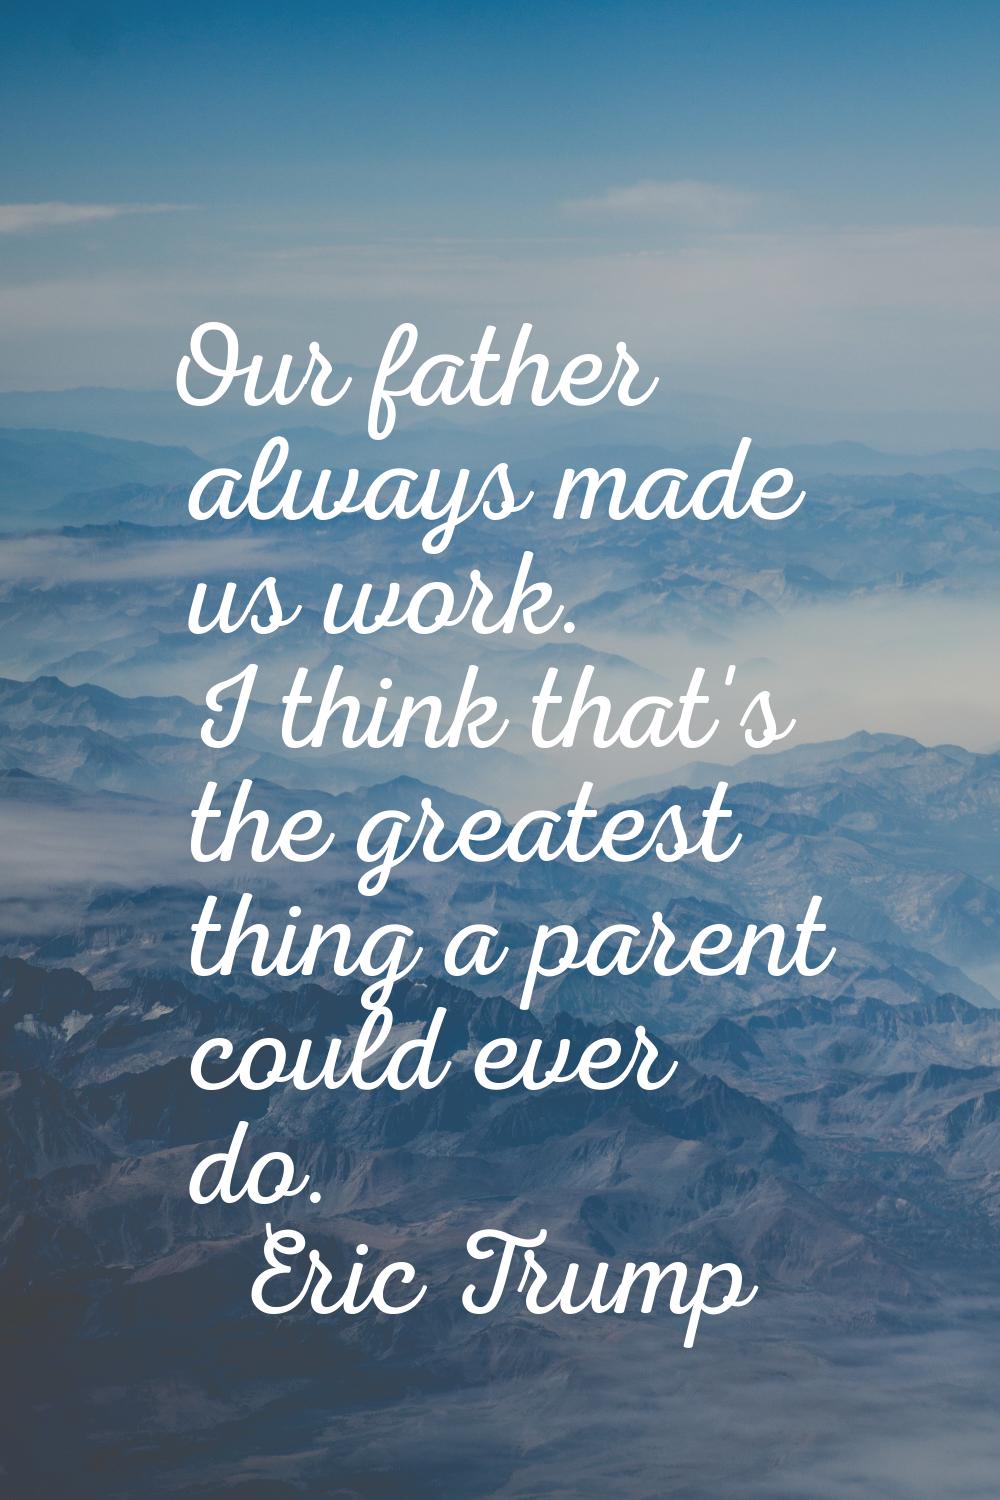 Our father always made us work. I think that's the greatest thing a parent could ever do.